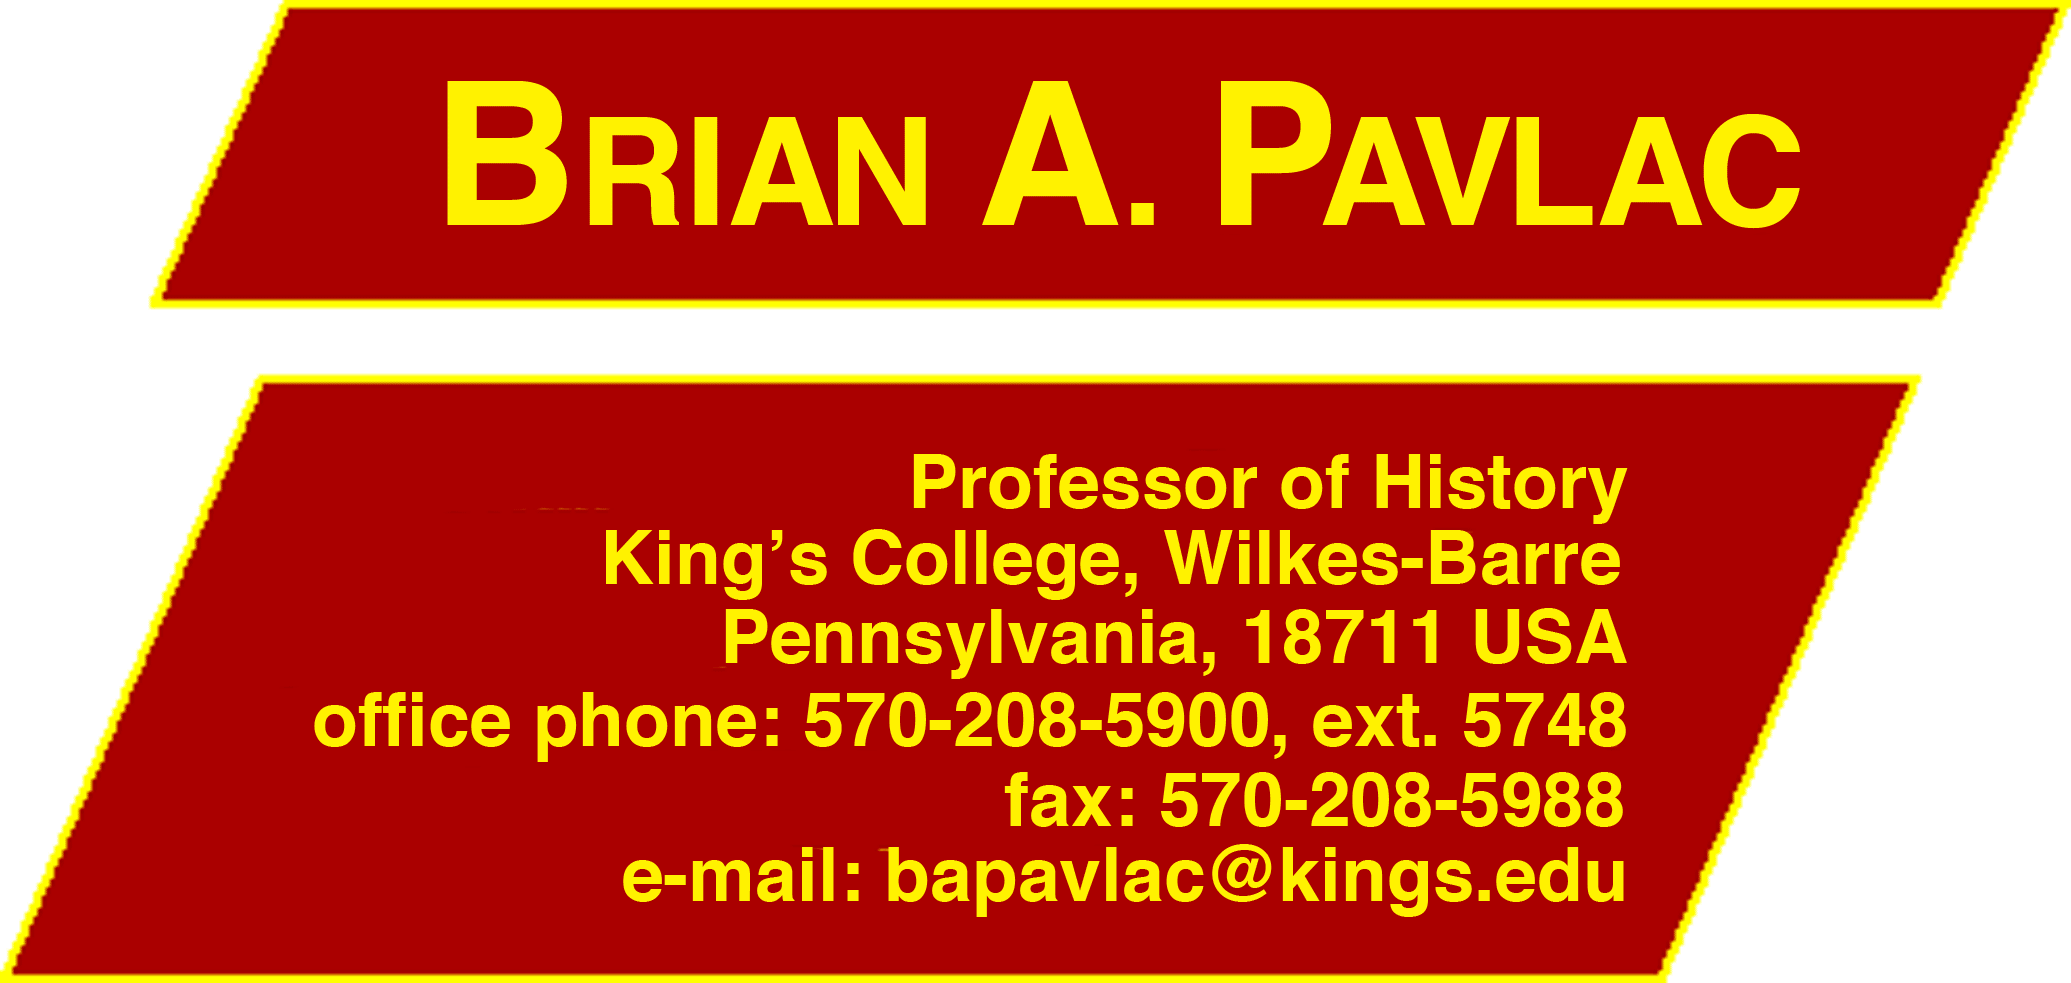 title and link to brian pavlac's academic homepage